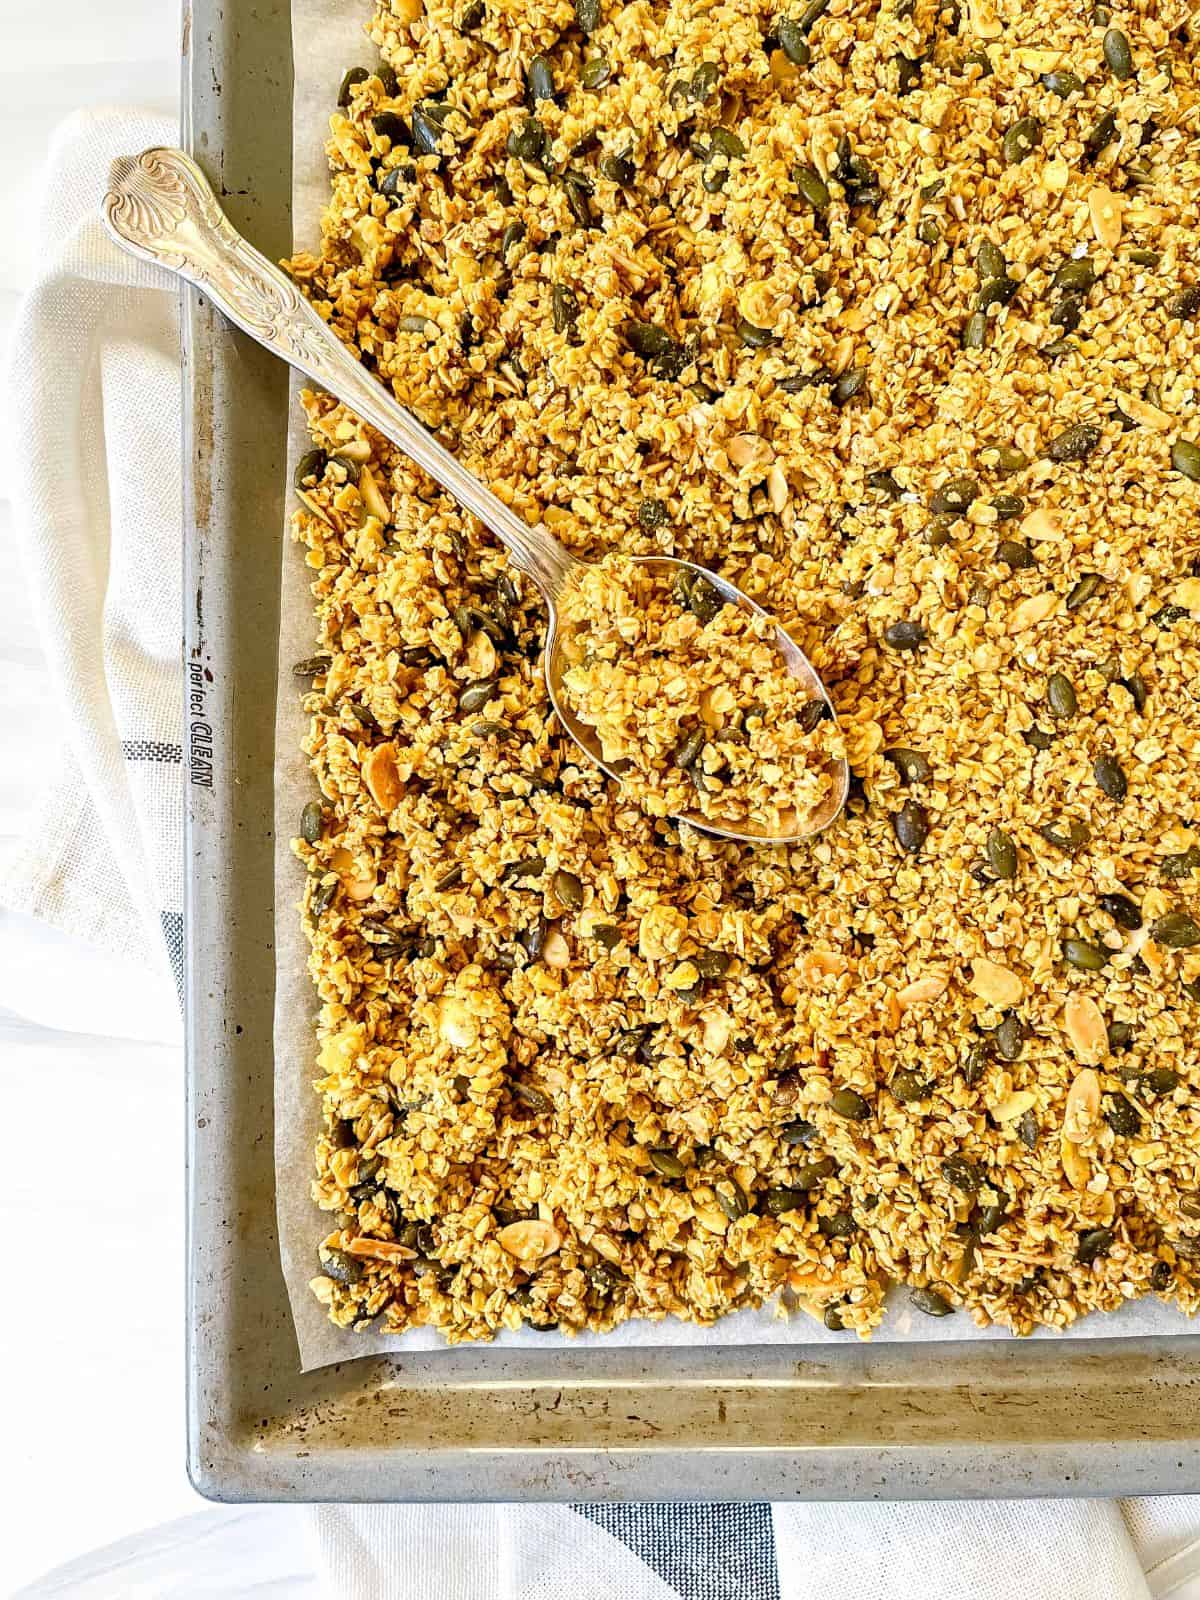 ginger turmeric granola on a baking tray lined with parchment paper with a decorative spoon on it.